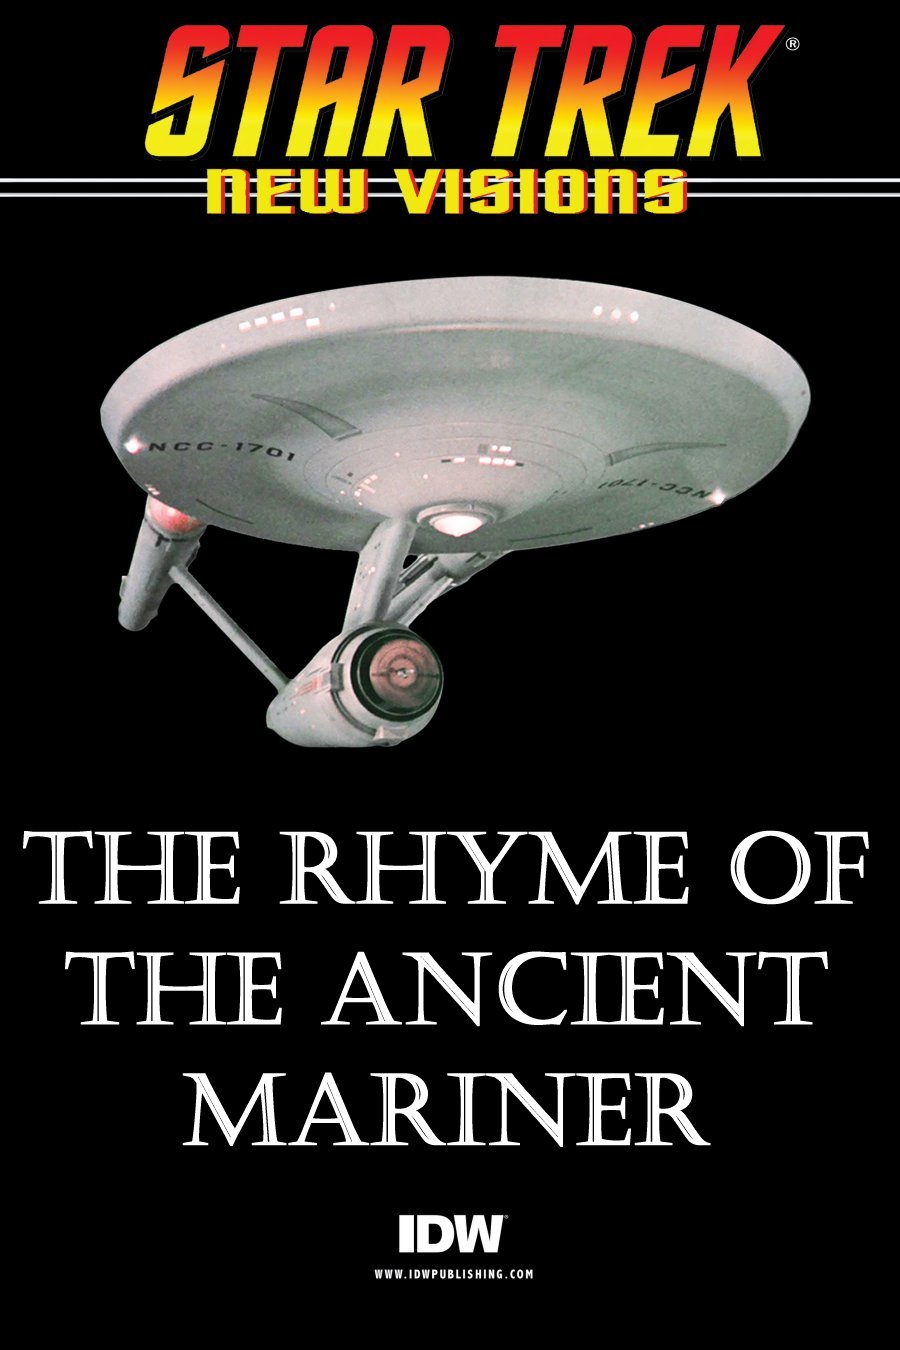 The rhyme of the ancient mariner.